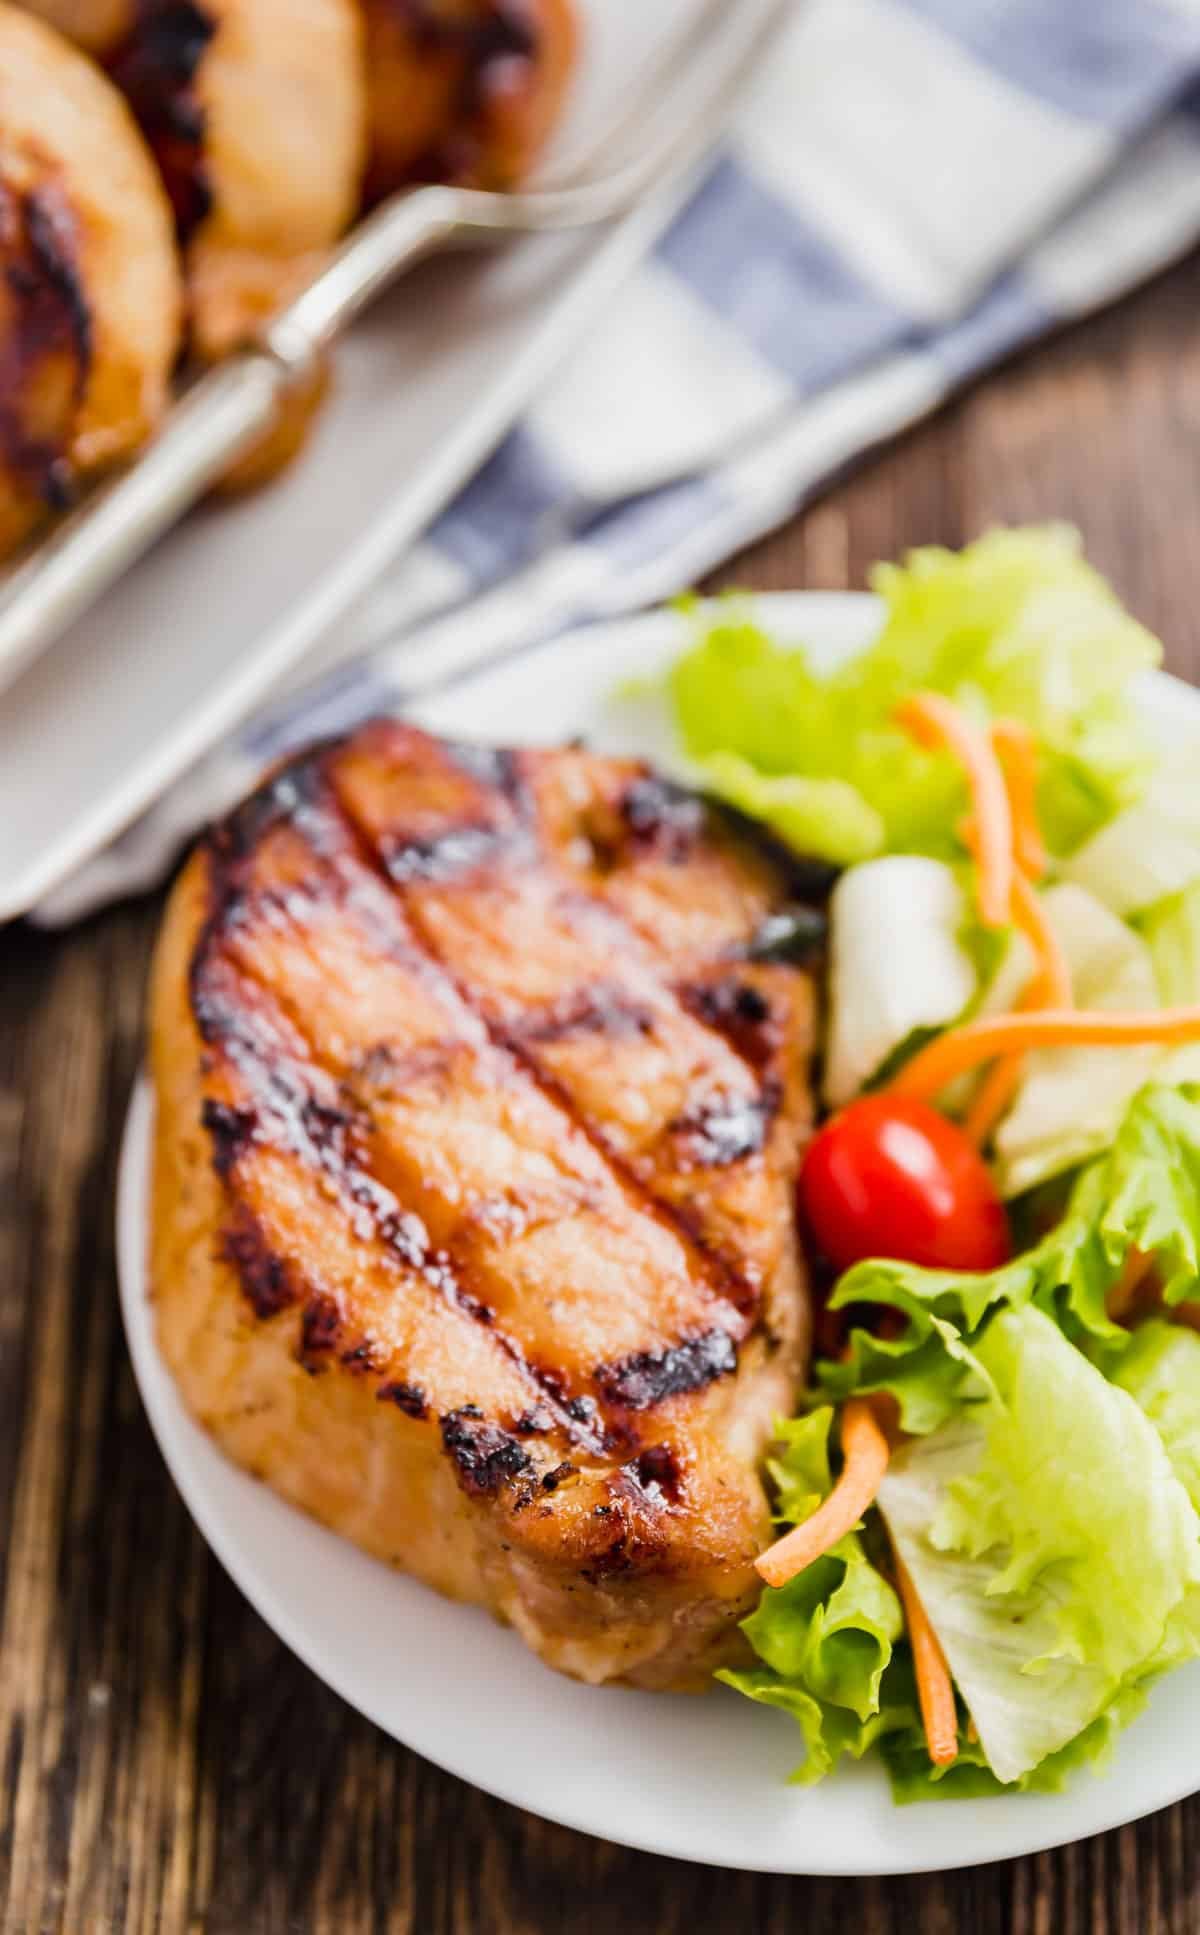 A pork chop that's been grilled on a plate with salad.